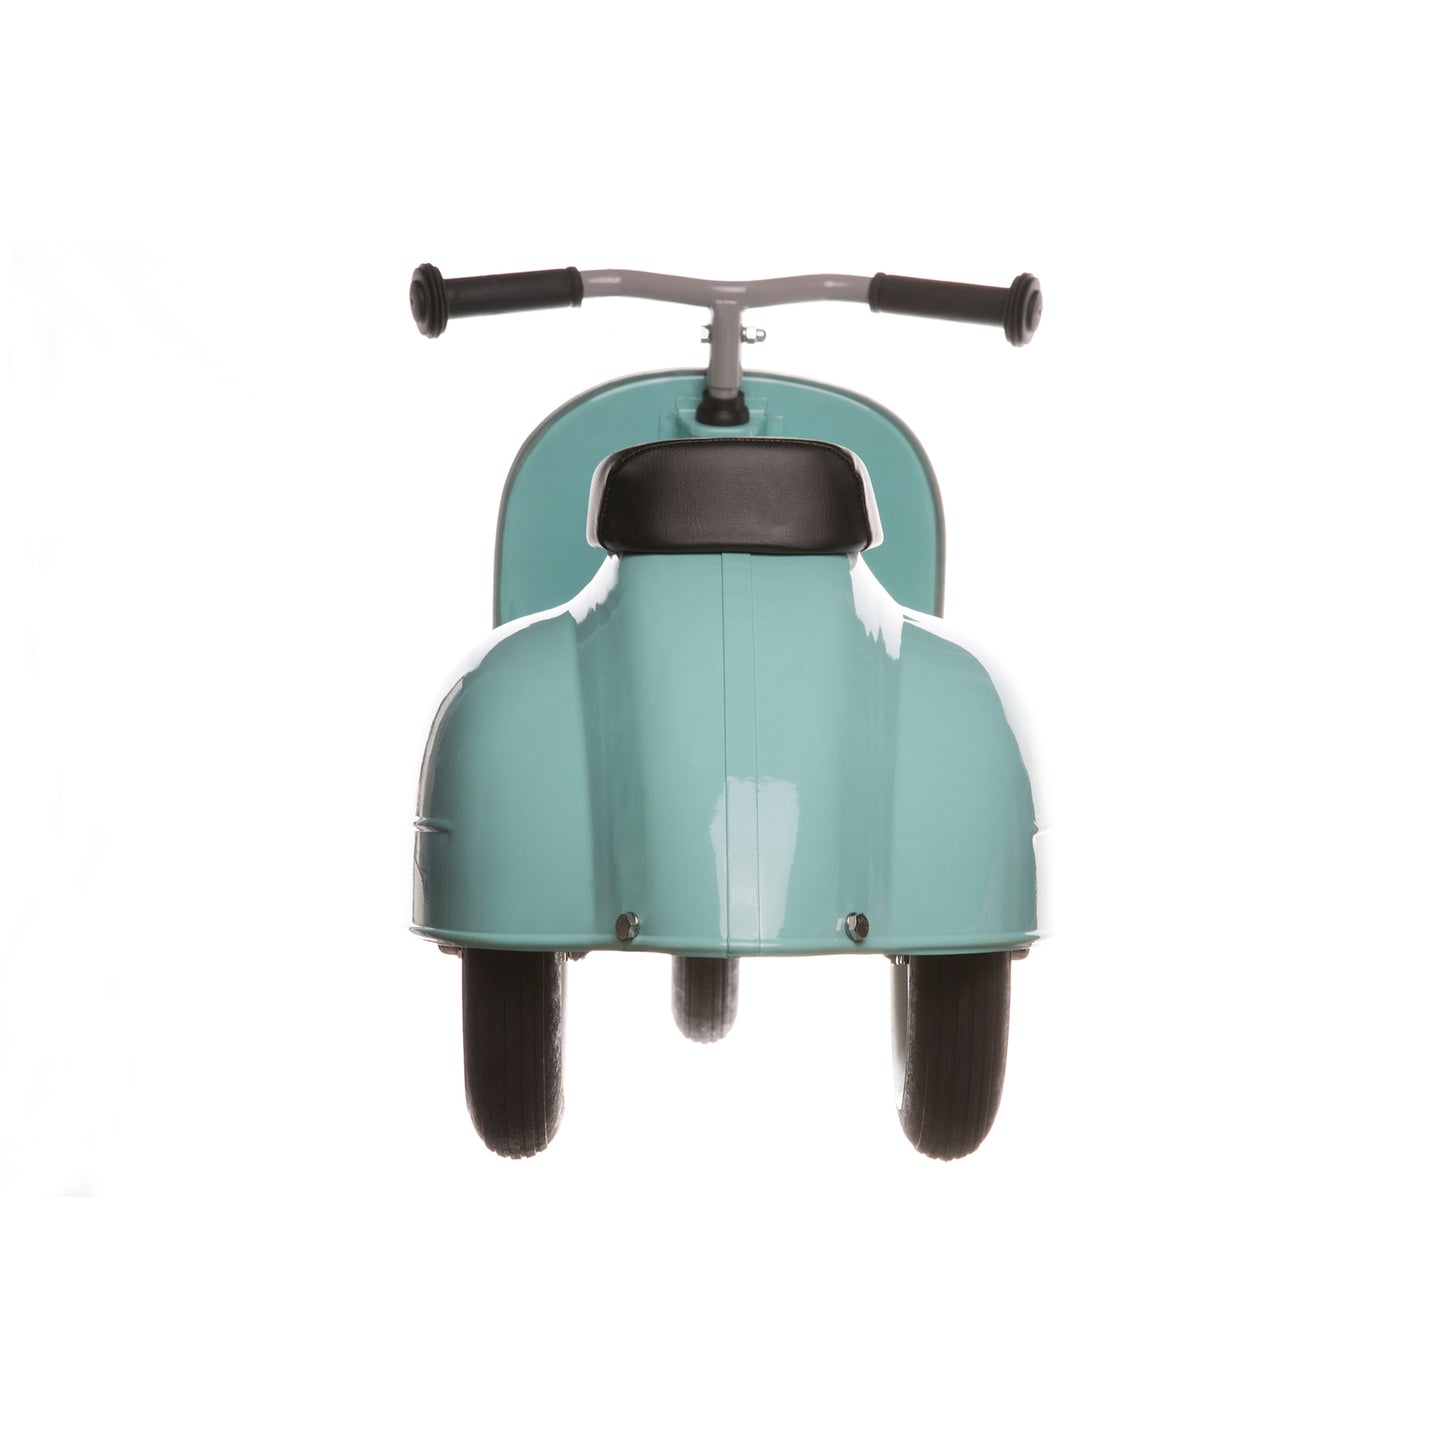 Mint Green Toddler Scooter